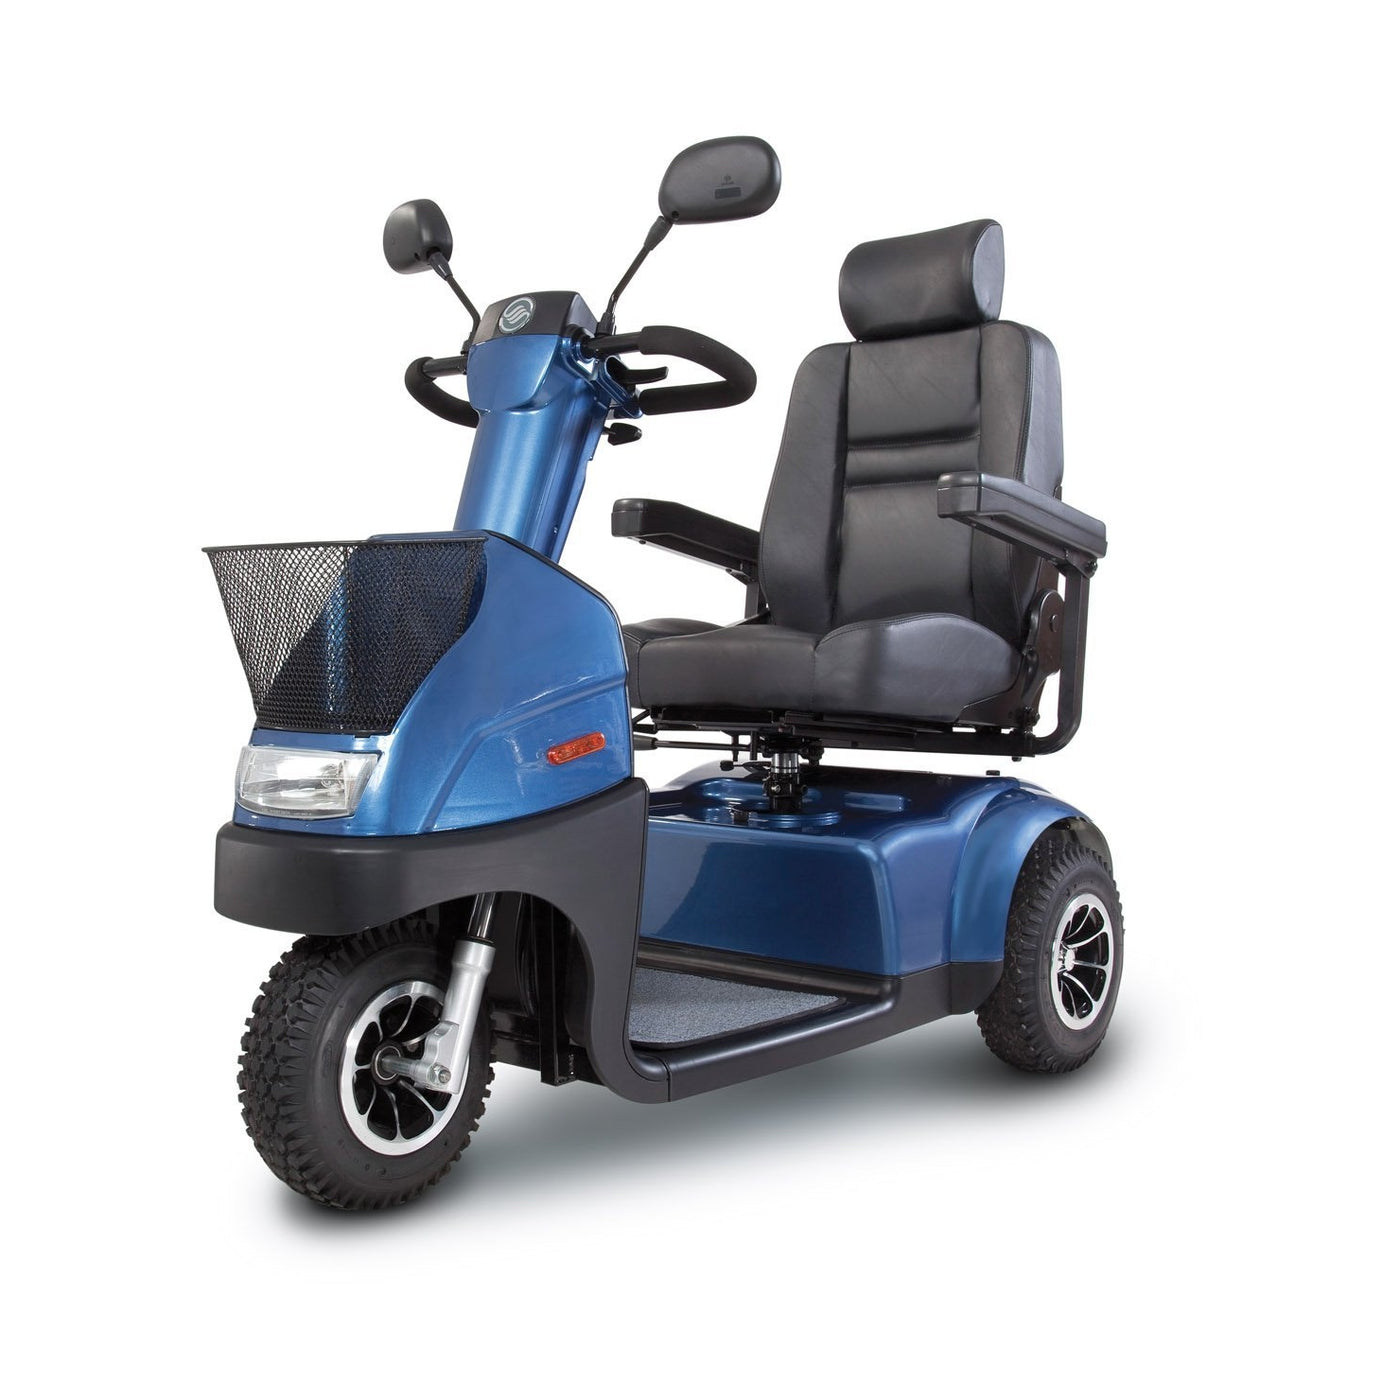 Afiscooter C3 Mobility Scooter — Wheelchair Australia 1481